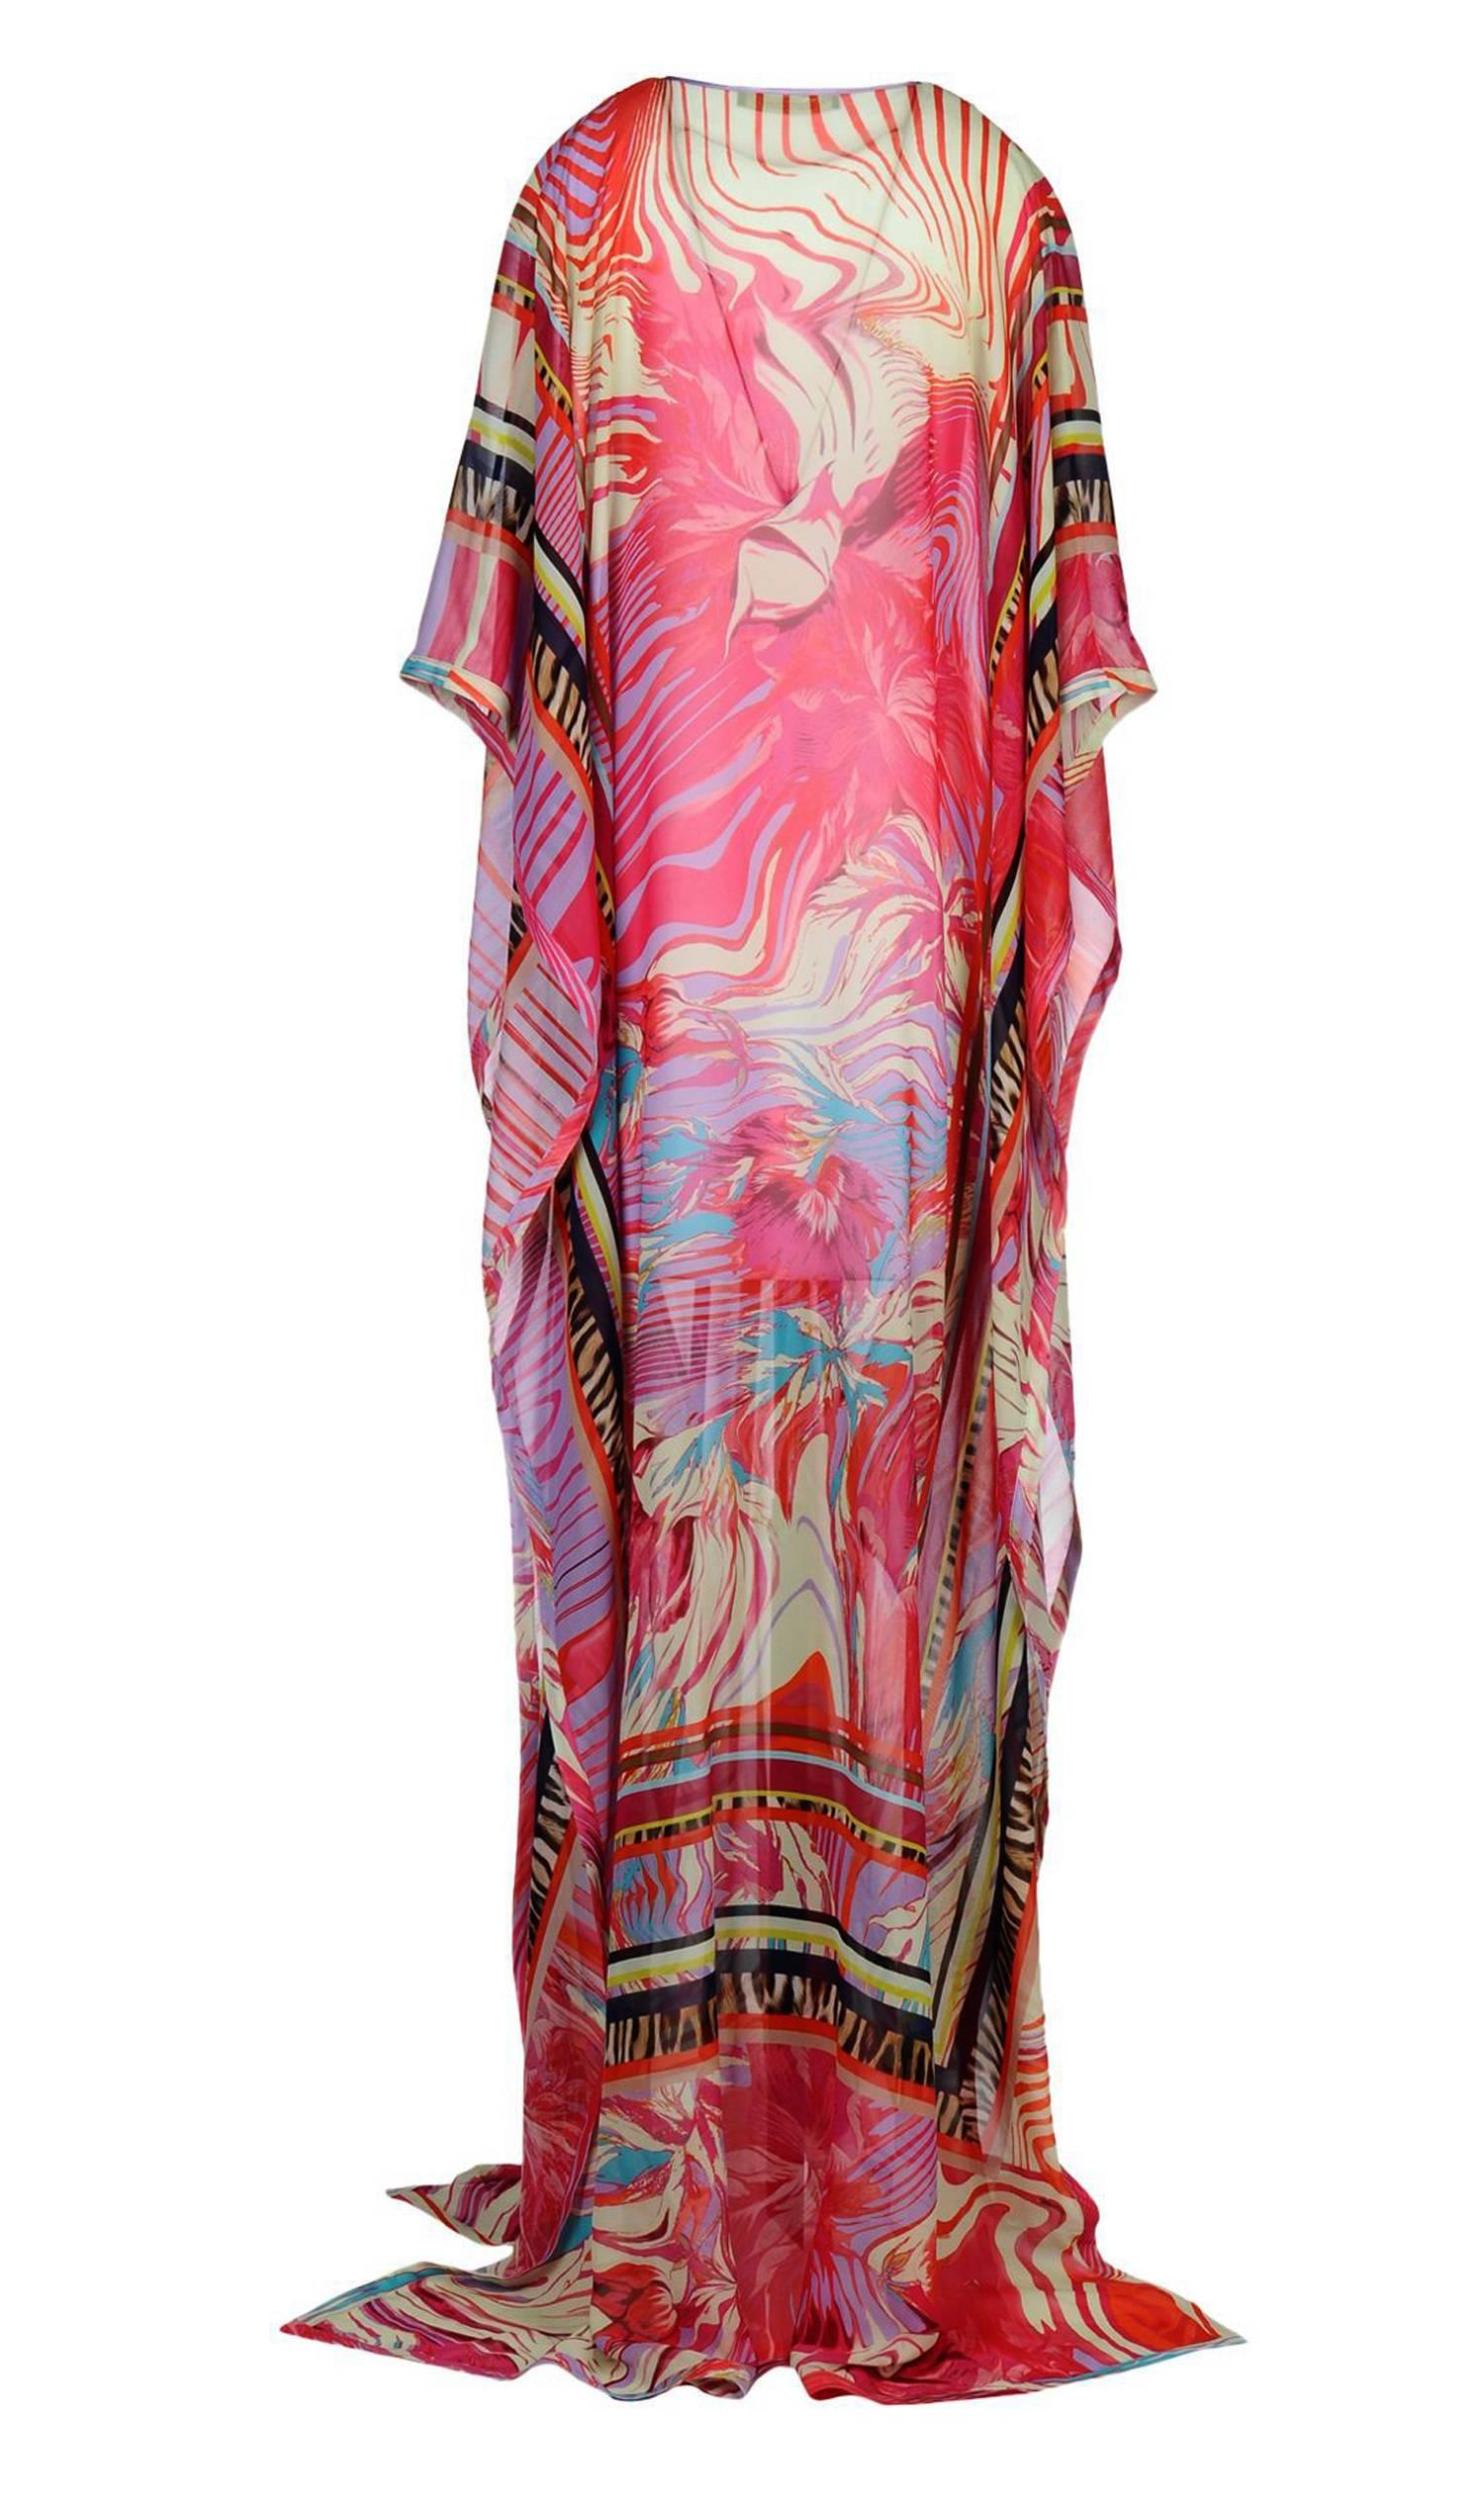 New Roberto Cavalli Silk Printed Caftan
Italian size 42 - US 6
Color - Multicolored
100% Silk
3/4 Length Sleeve
Slips-on 
Made in Italy
New with Tag.
